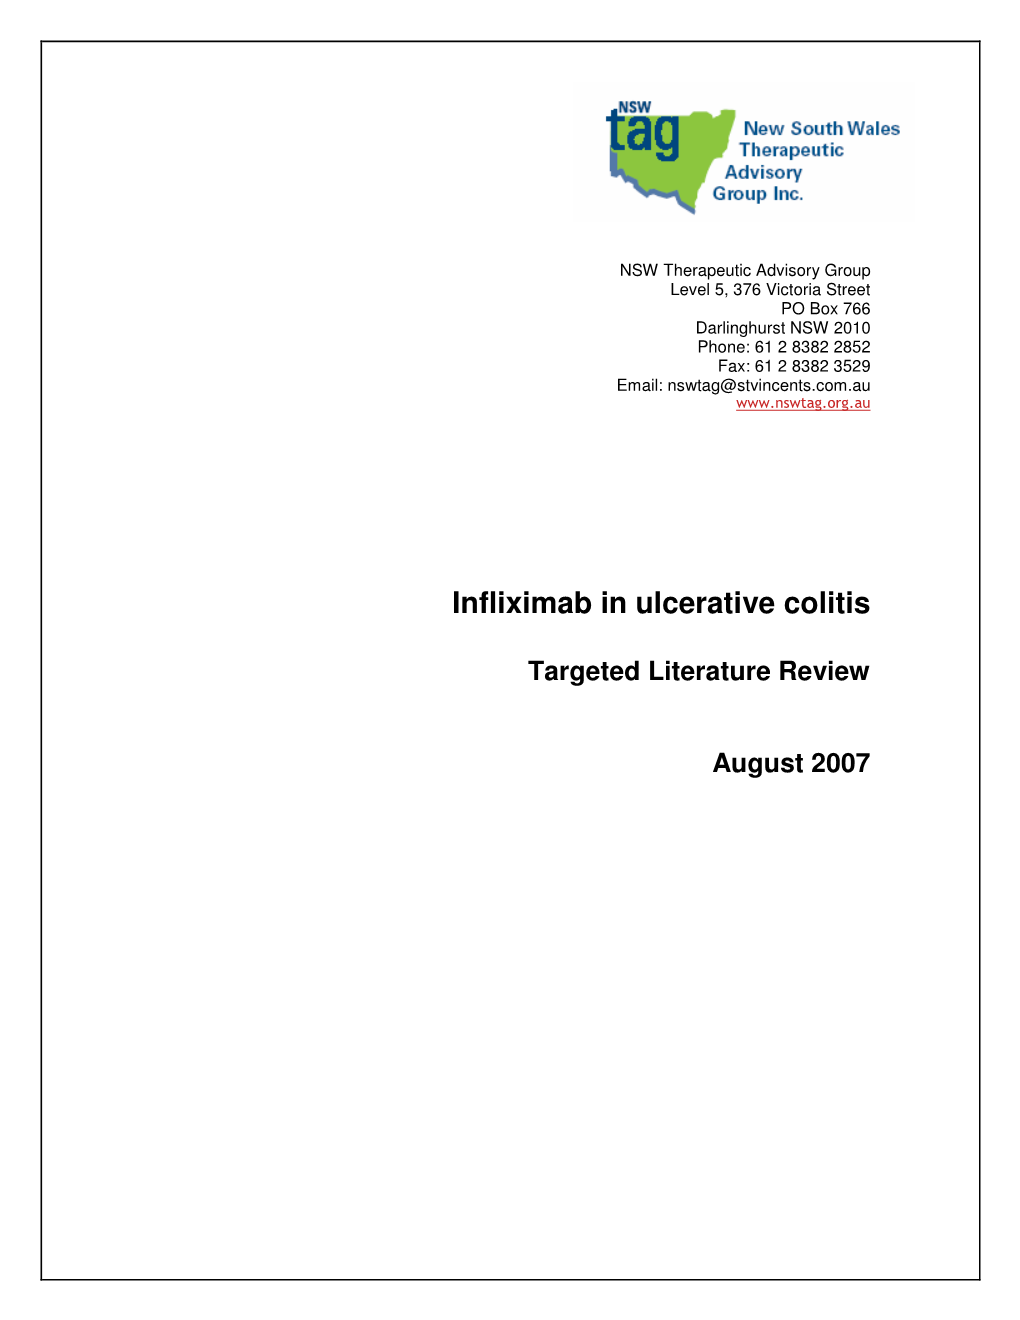 Targeted Literature Review of Ulcerative Colitis August 2007